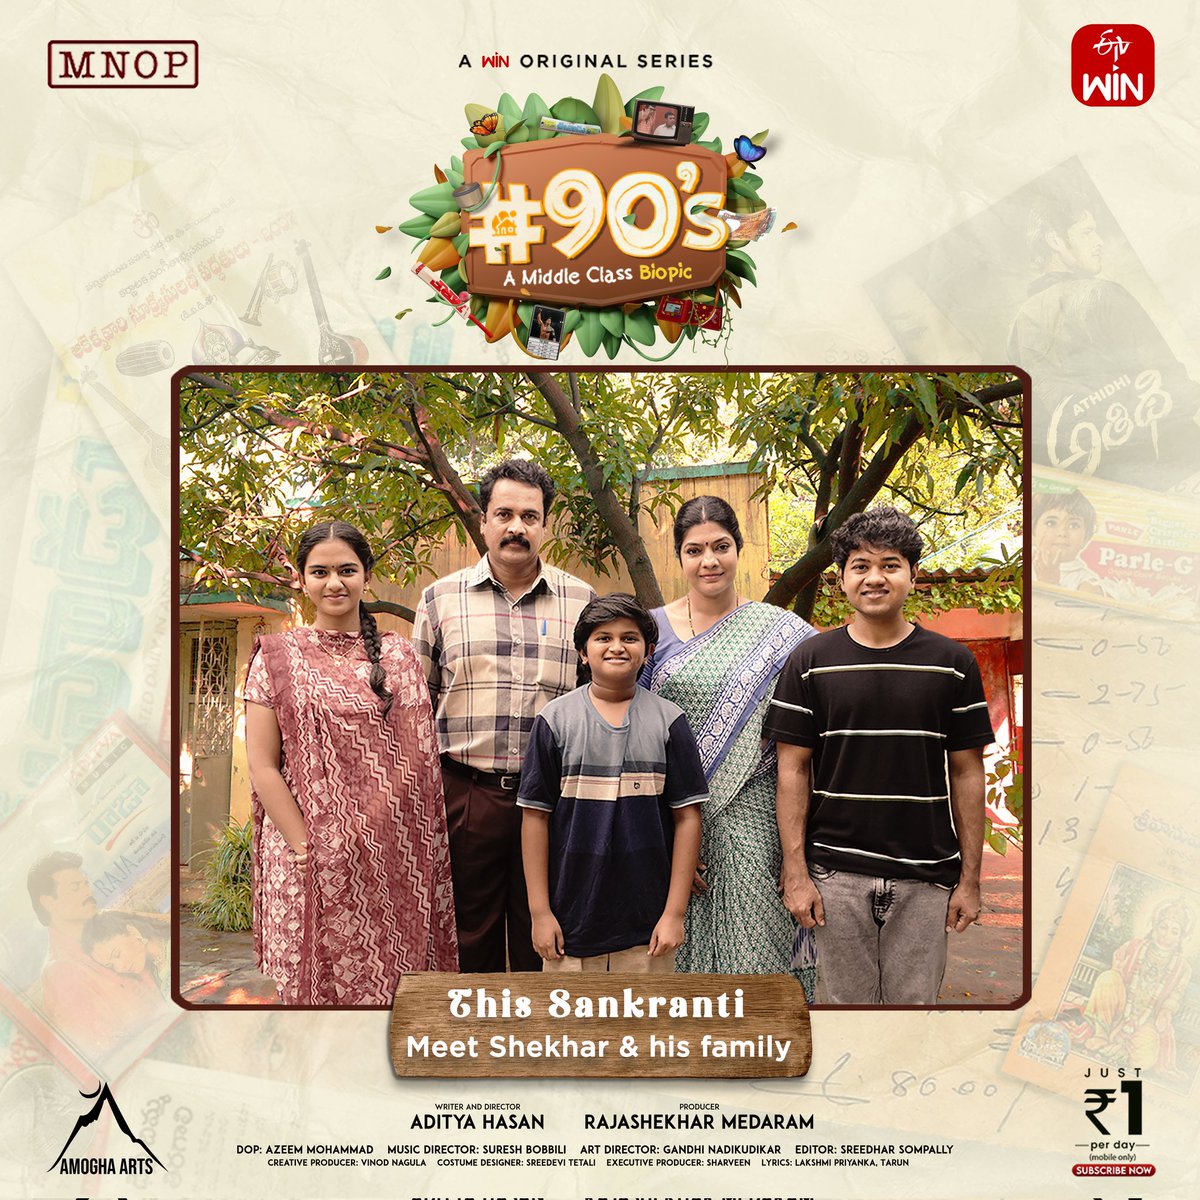 Best Wishes to #Shivaji and the entire team of #90’s - A Middle Class Biopic. 👍 youtu.be/zBJFg4ZHAp4 @adityahaasan @rajashekharmedaram @mouli_talks @MNOPRODUCTIONS @AmoghaArts @etvwin